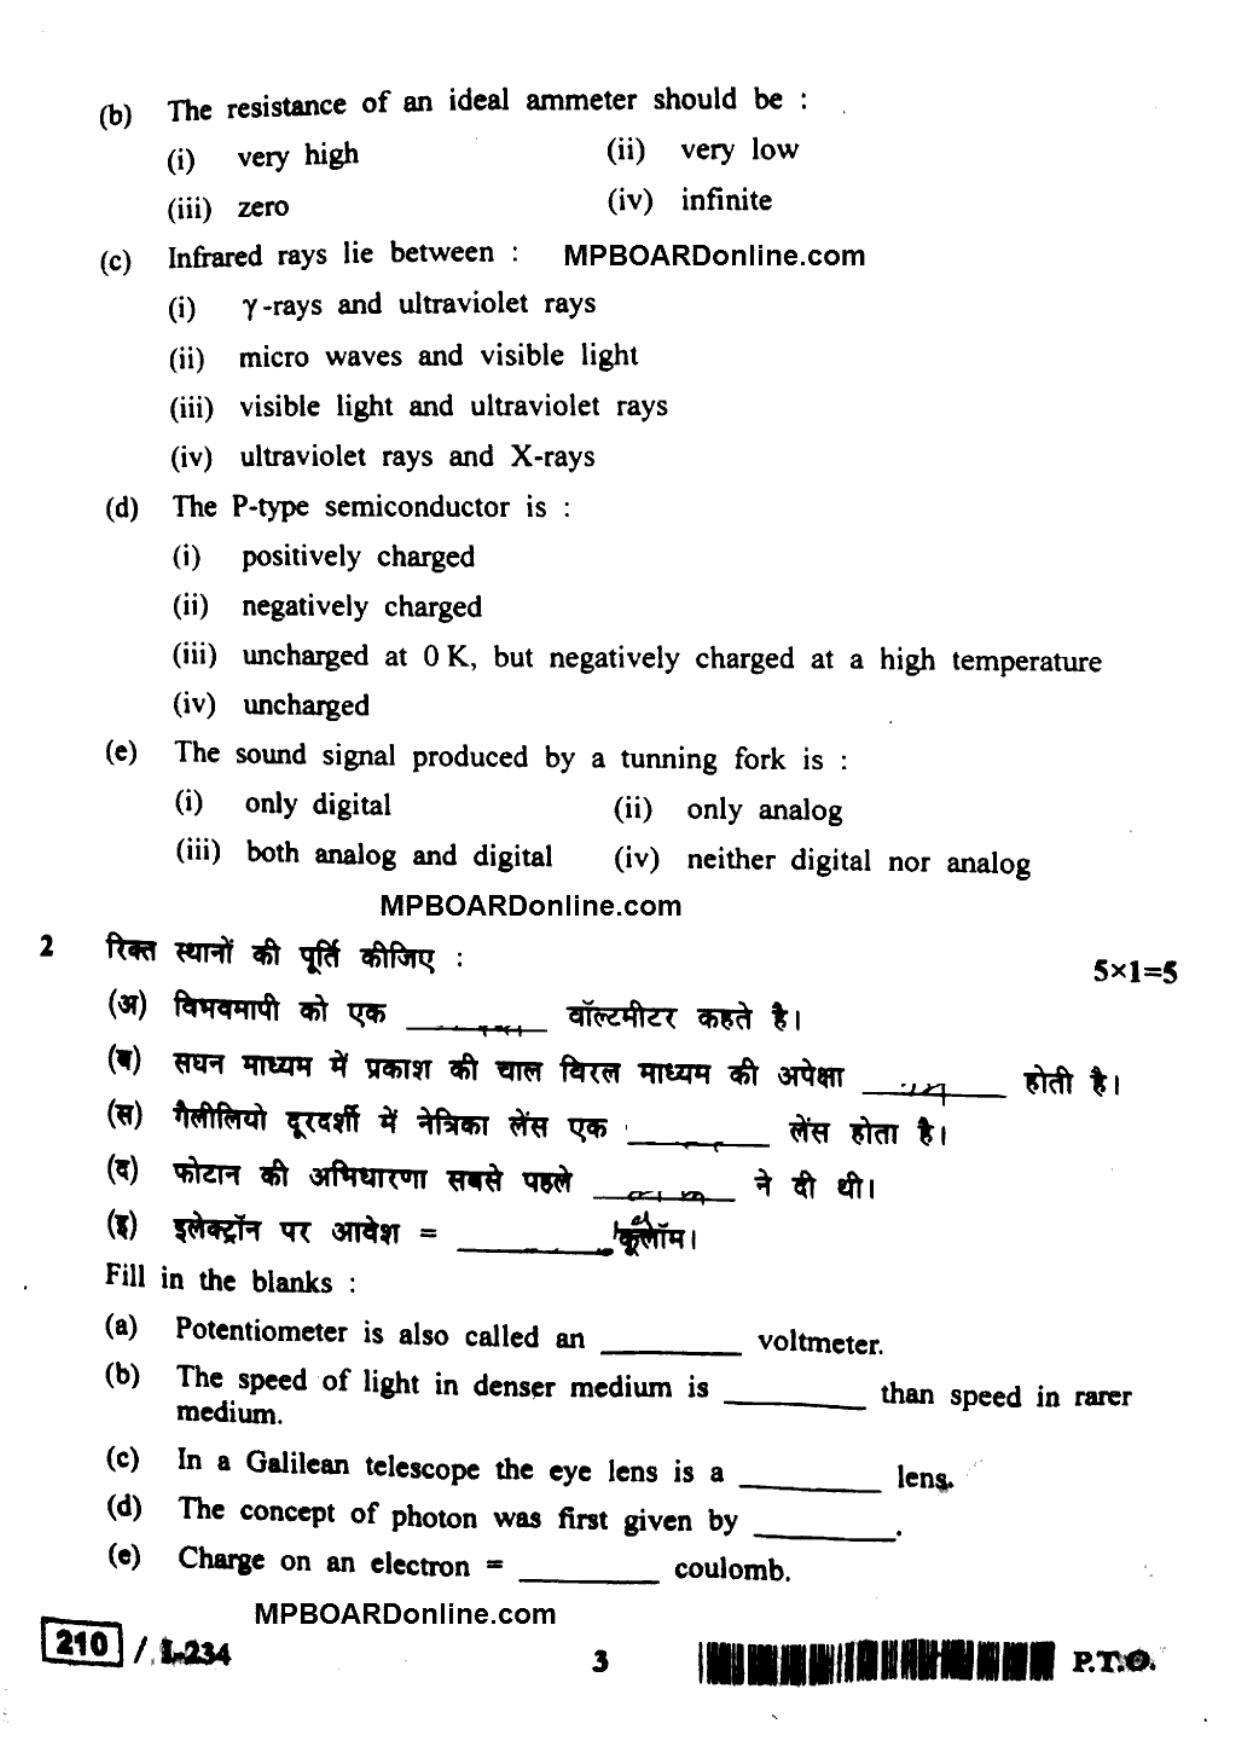 MP Board Class 12 Physics 2018 Question Paper - Page 3